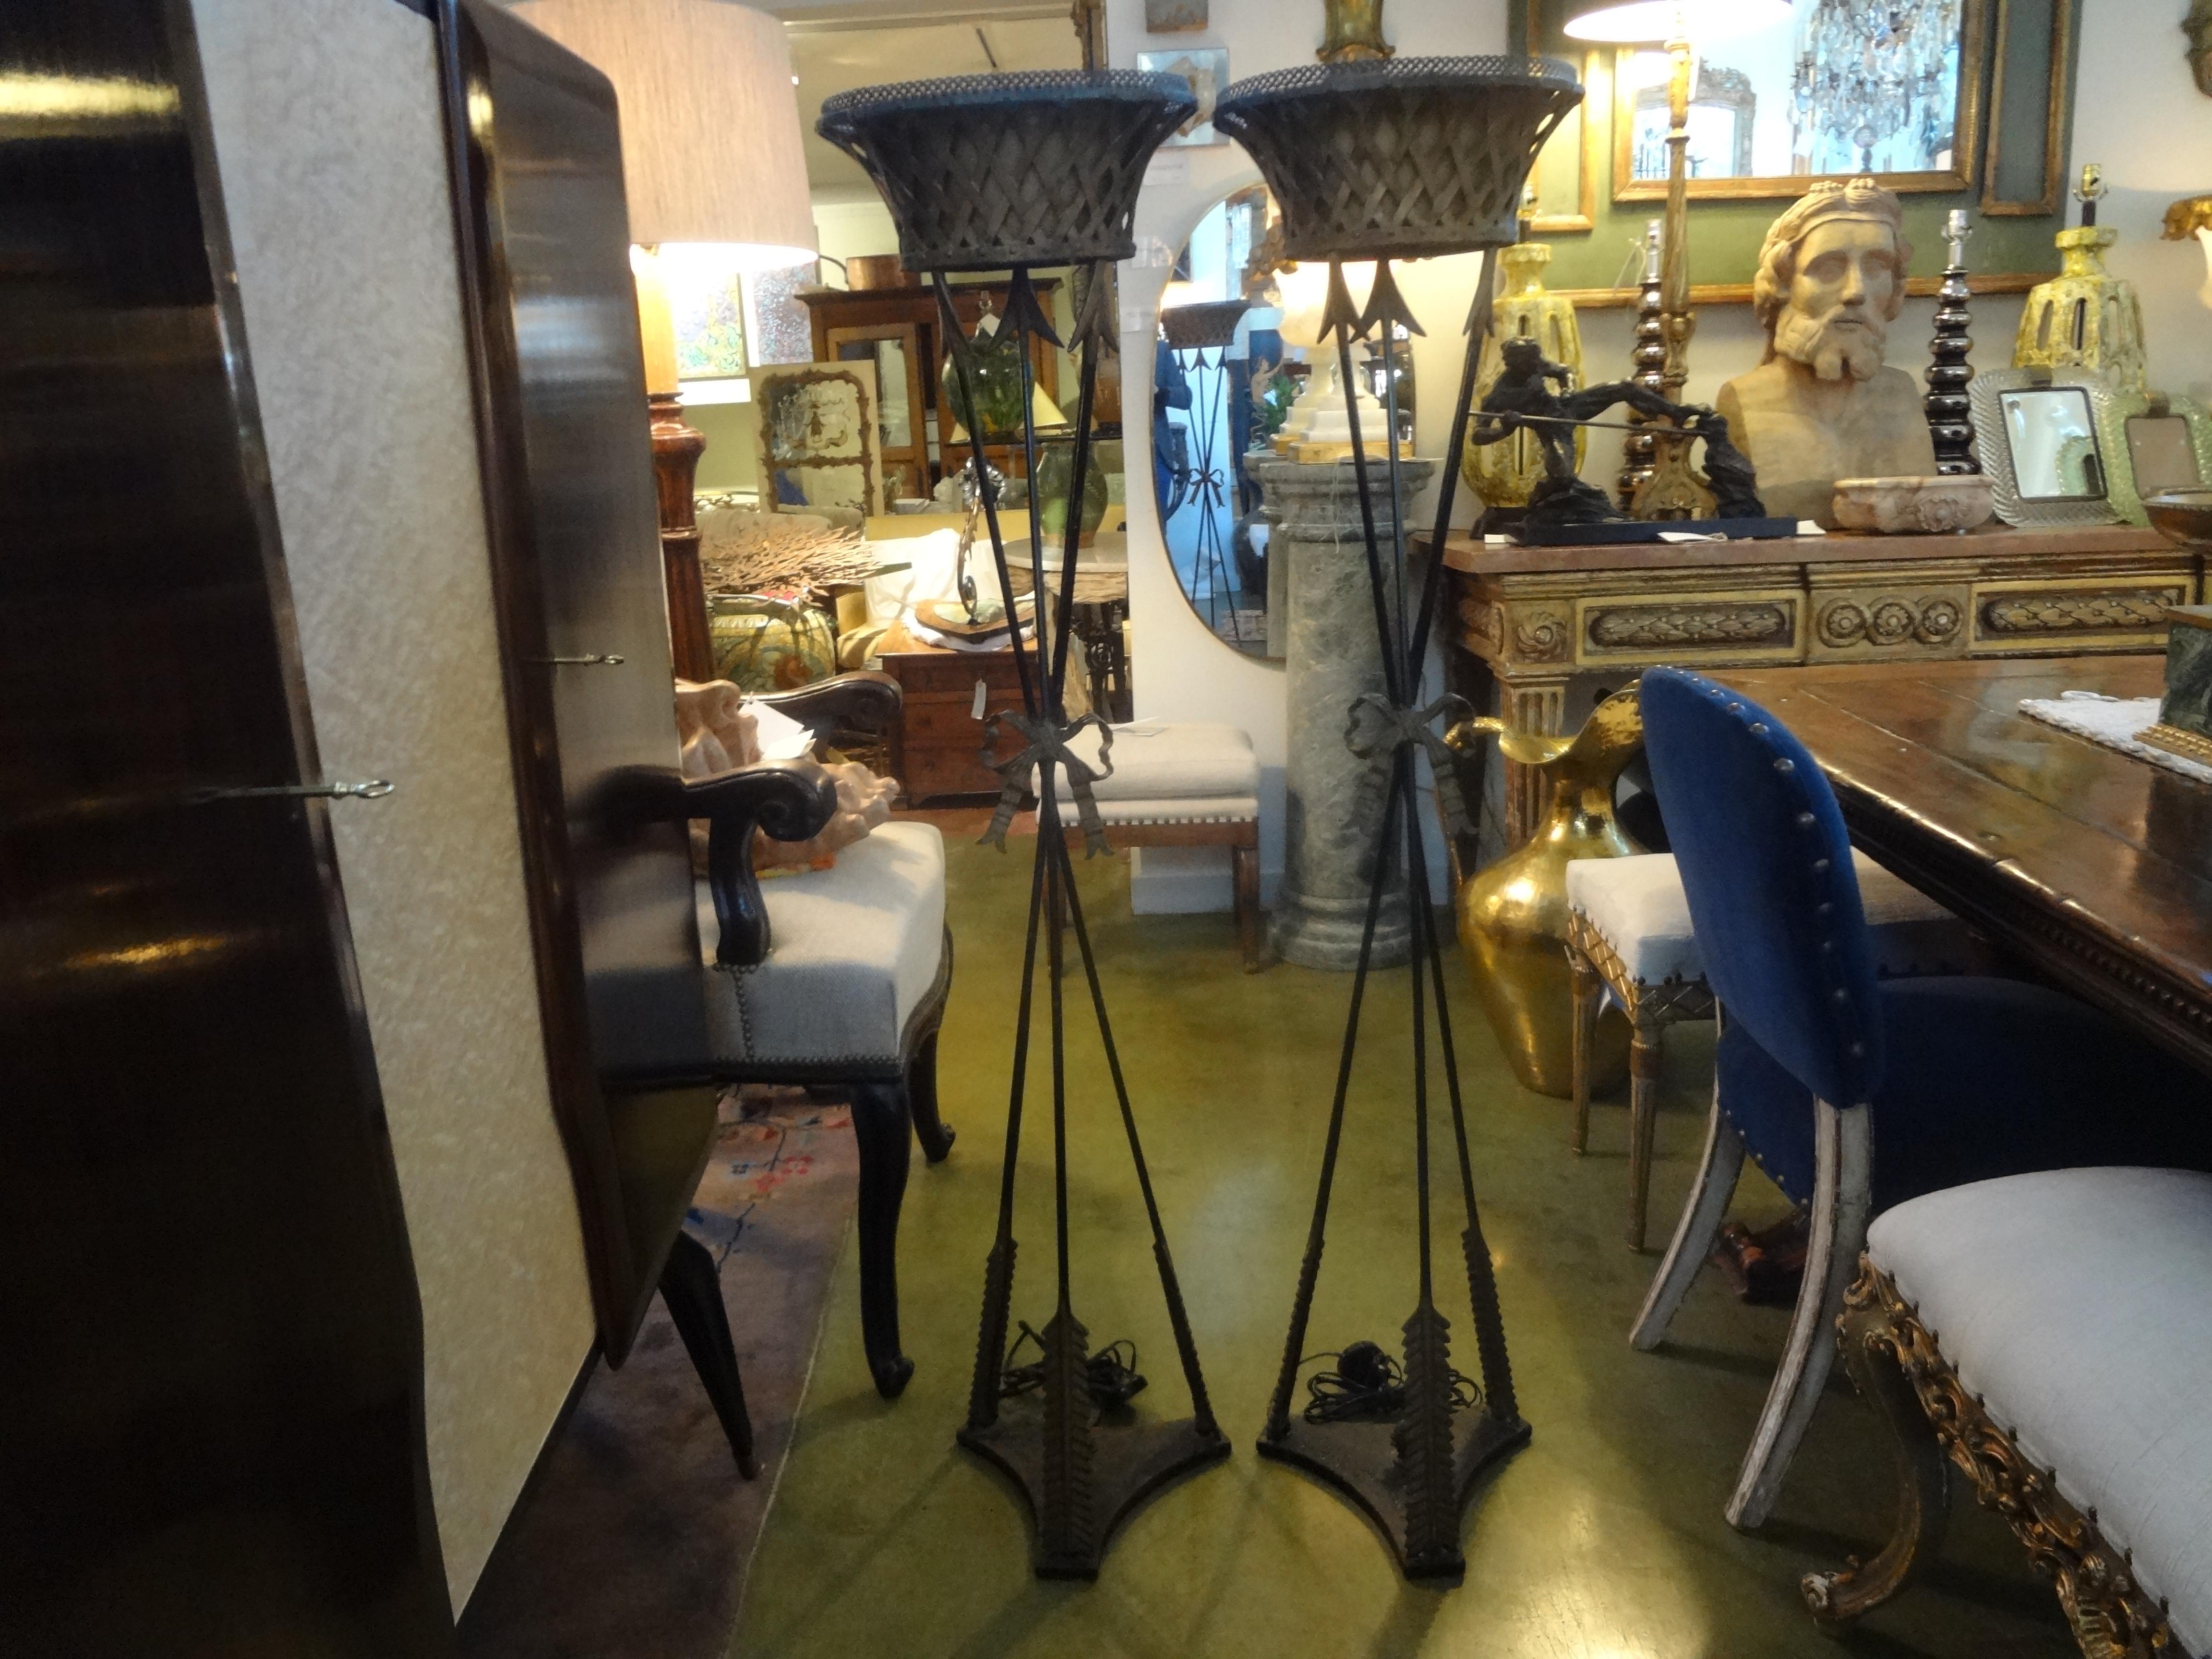 Pair of antique French Neoclassical style iron torchieres.
Stunning pair of French Neoclassical style iron torchères, torchiere, torche`re lamps or floor lamps, circa 1920, possibly earlier. These antique French Louis XVI style uplight floor lamps